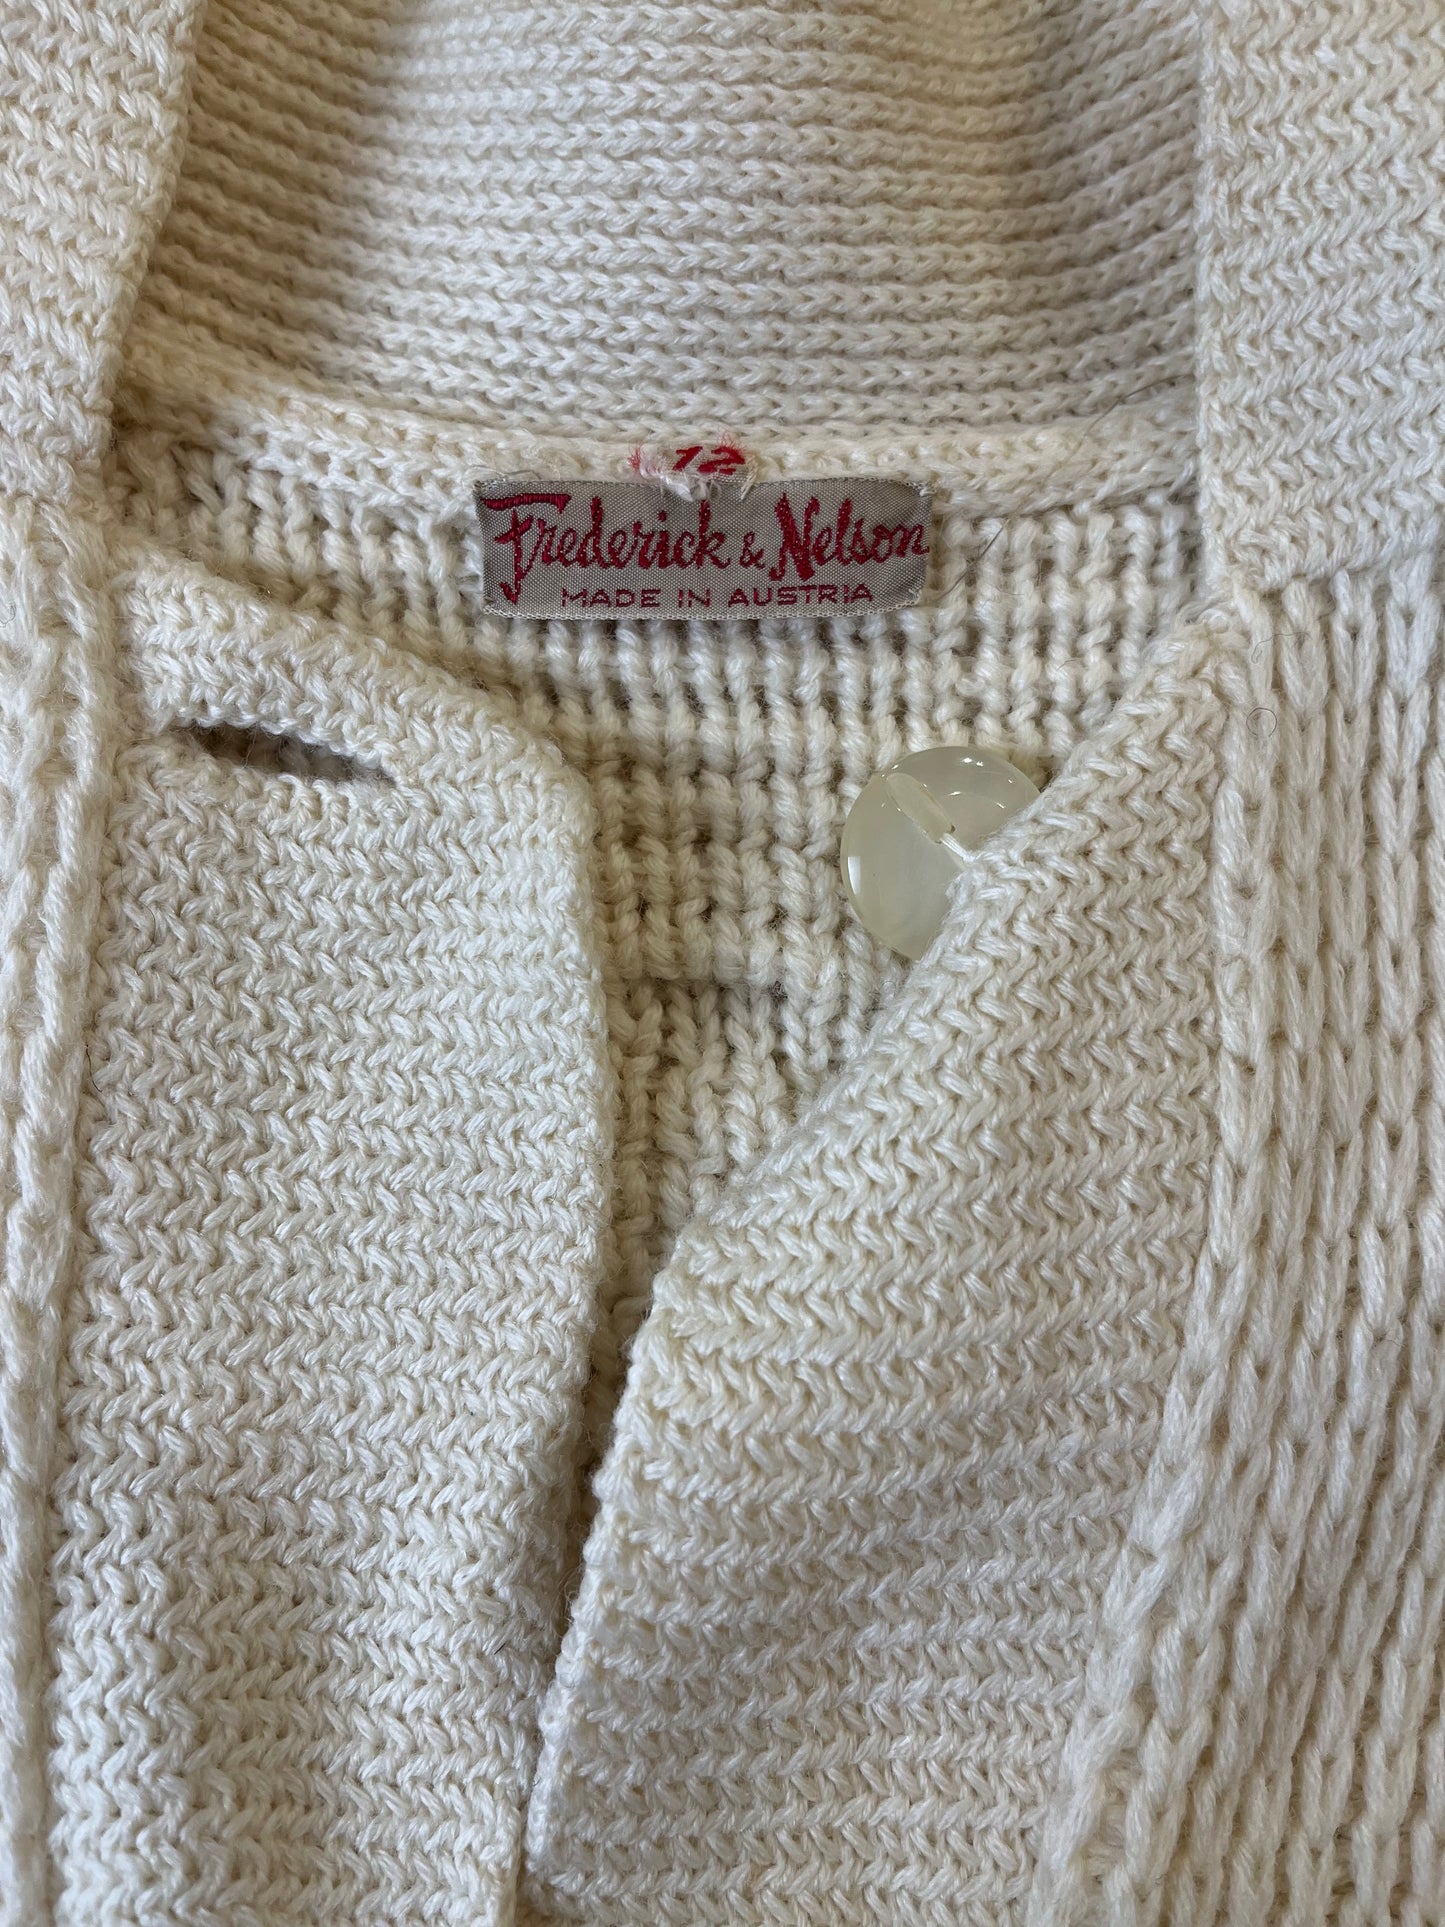 80s 'Frederick & Nelson' Cream Knit Cardigan Sweater / Small